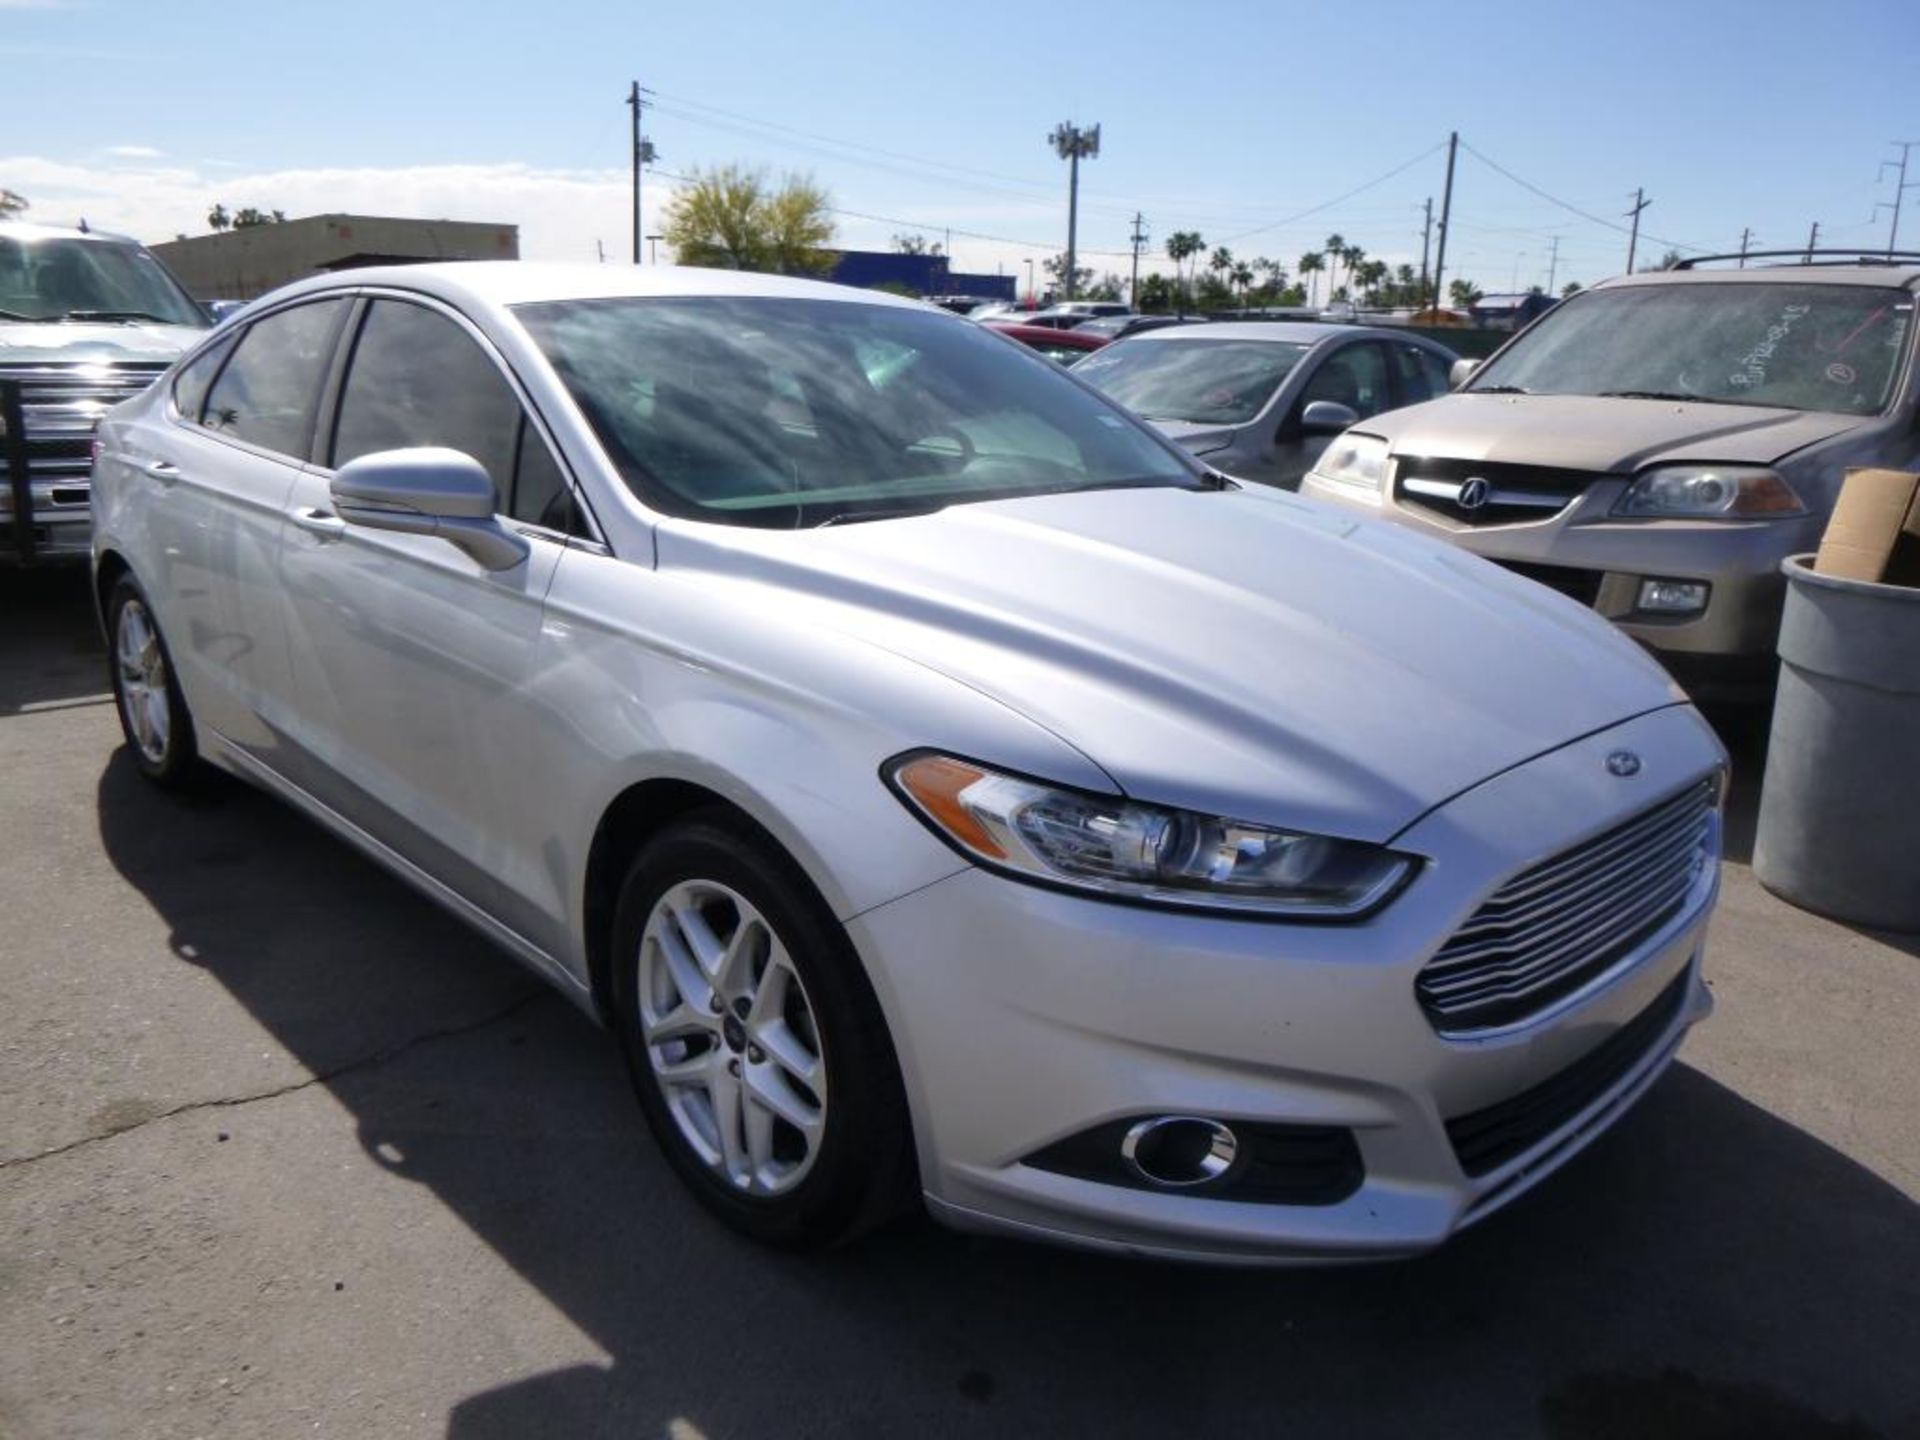 (Lot # 3345) 2014 Ford Fusion - Image 5 of 14